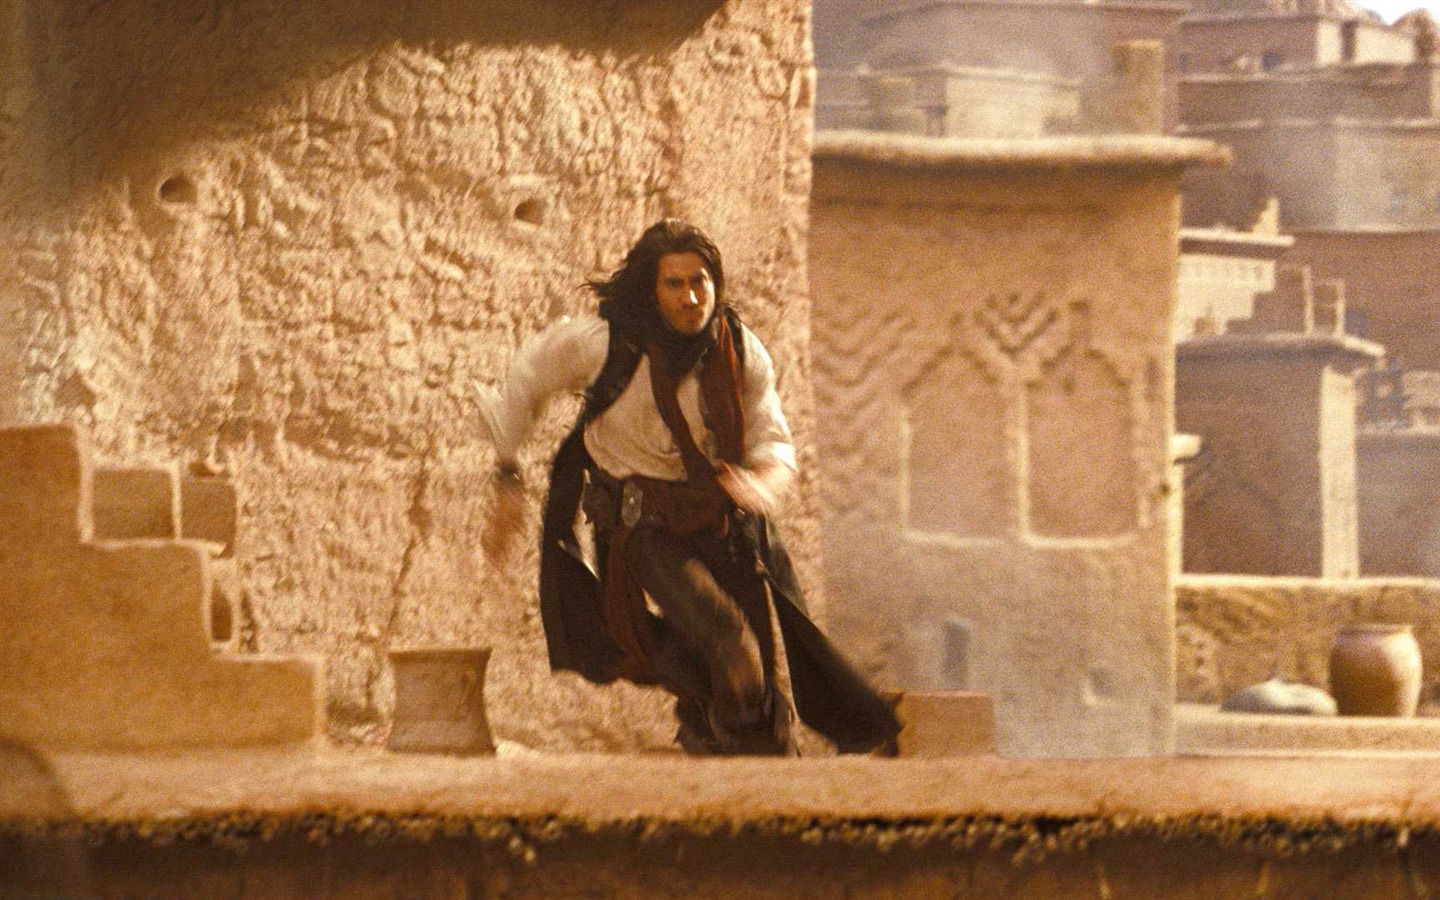 Prince of Persia The Sands of Time 波斯王子：时之刃34 - 1440x900